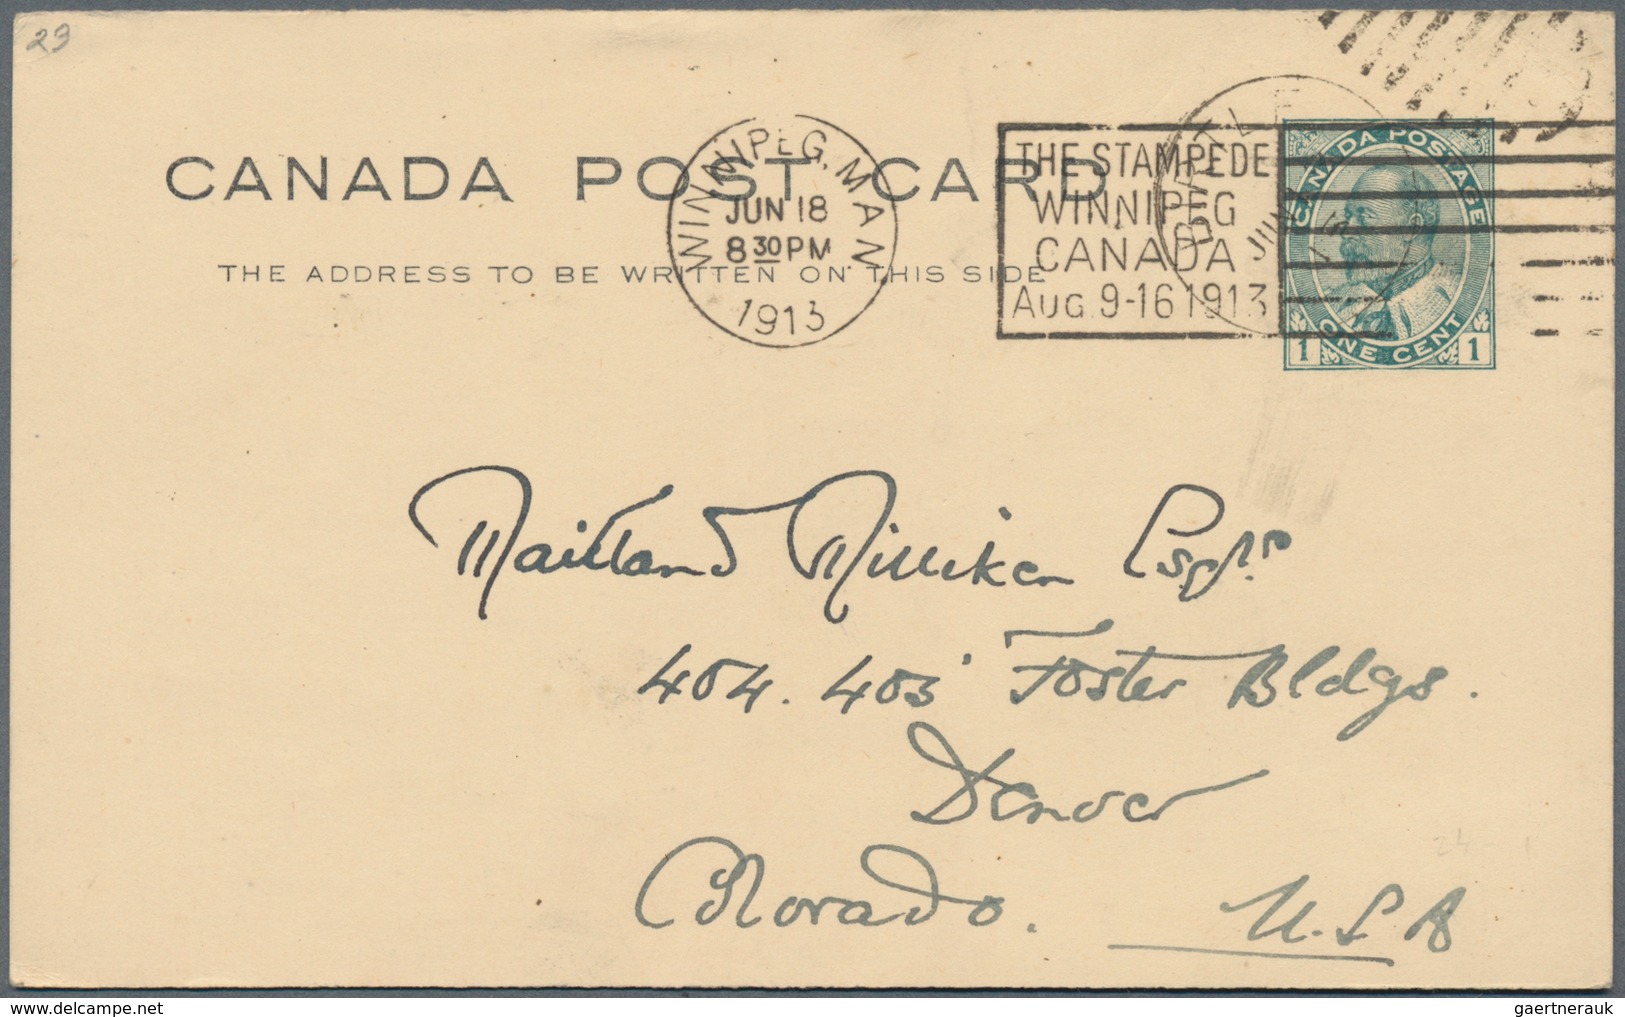 Canada - Stempel: 1913/1919, four postal stationery cards with special cancels: "THE STAMPED WINNIPE